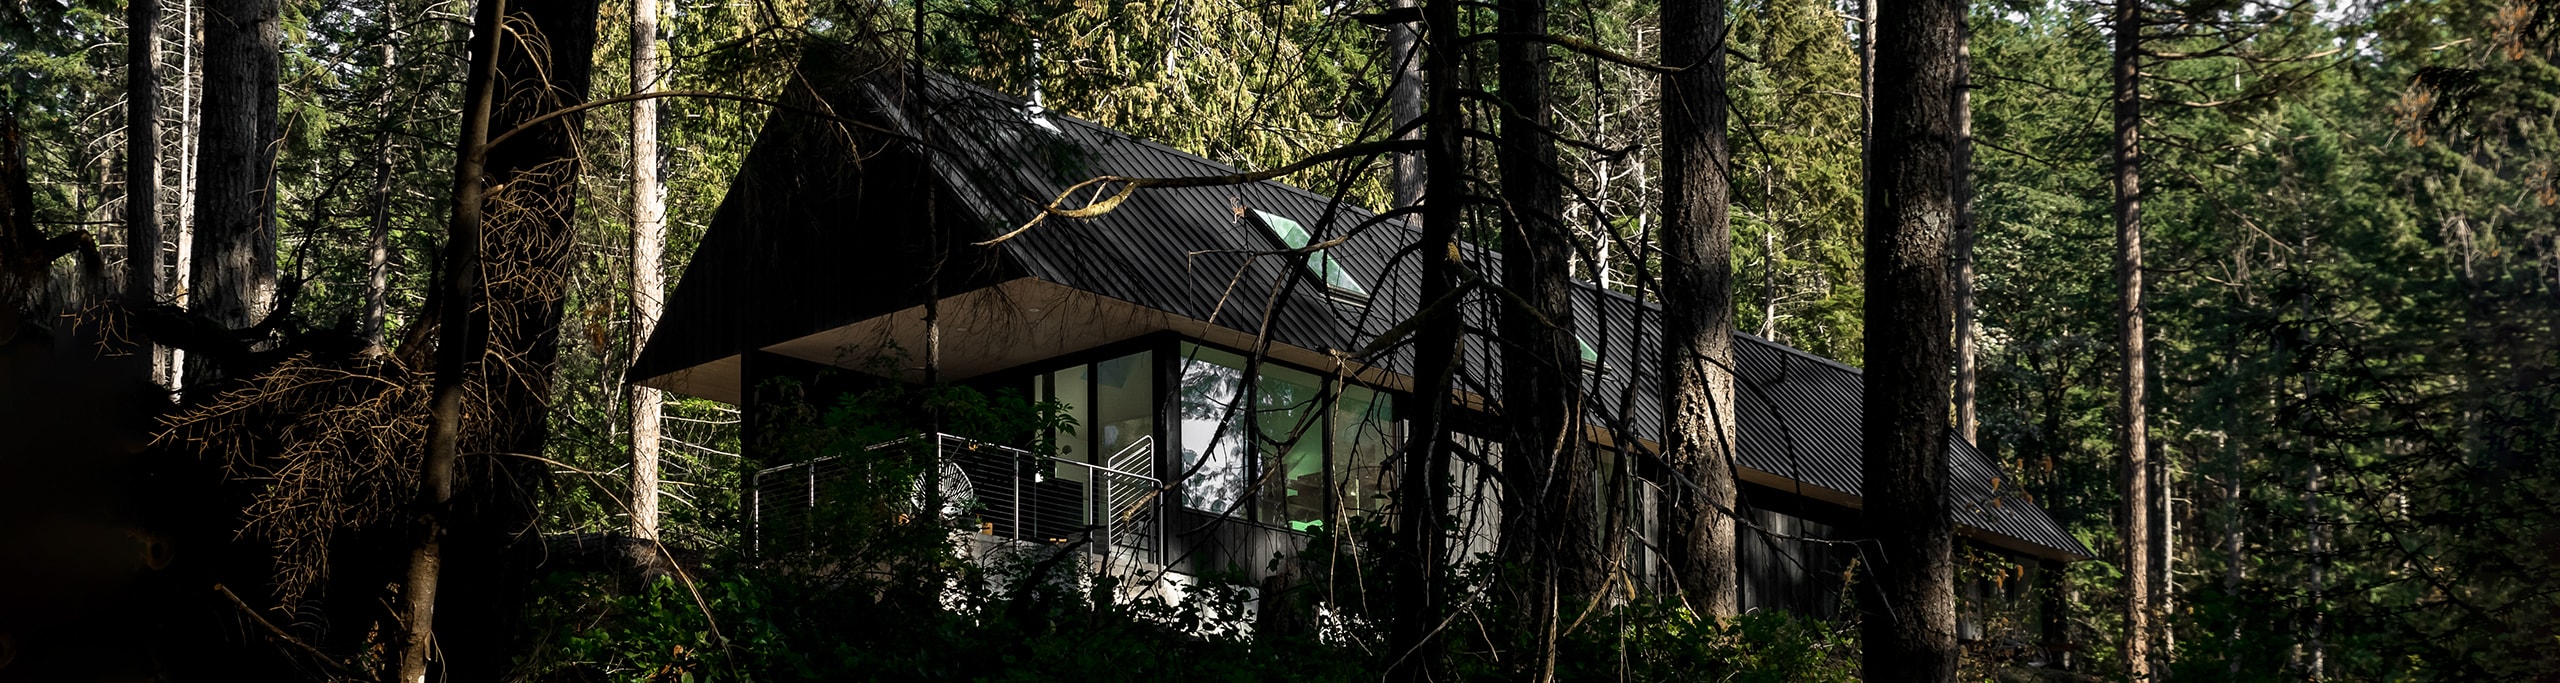 new home built in a forest